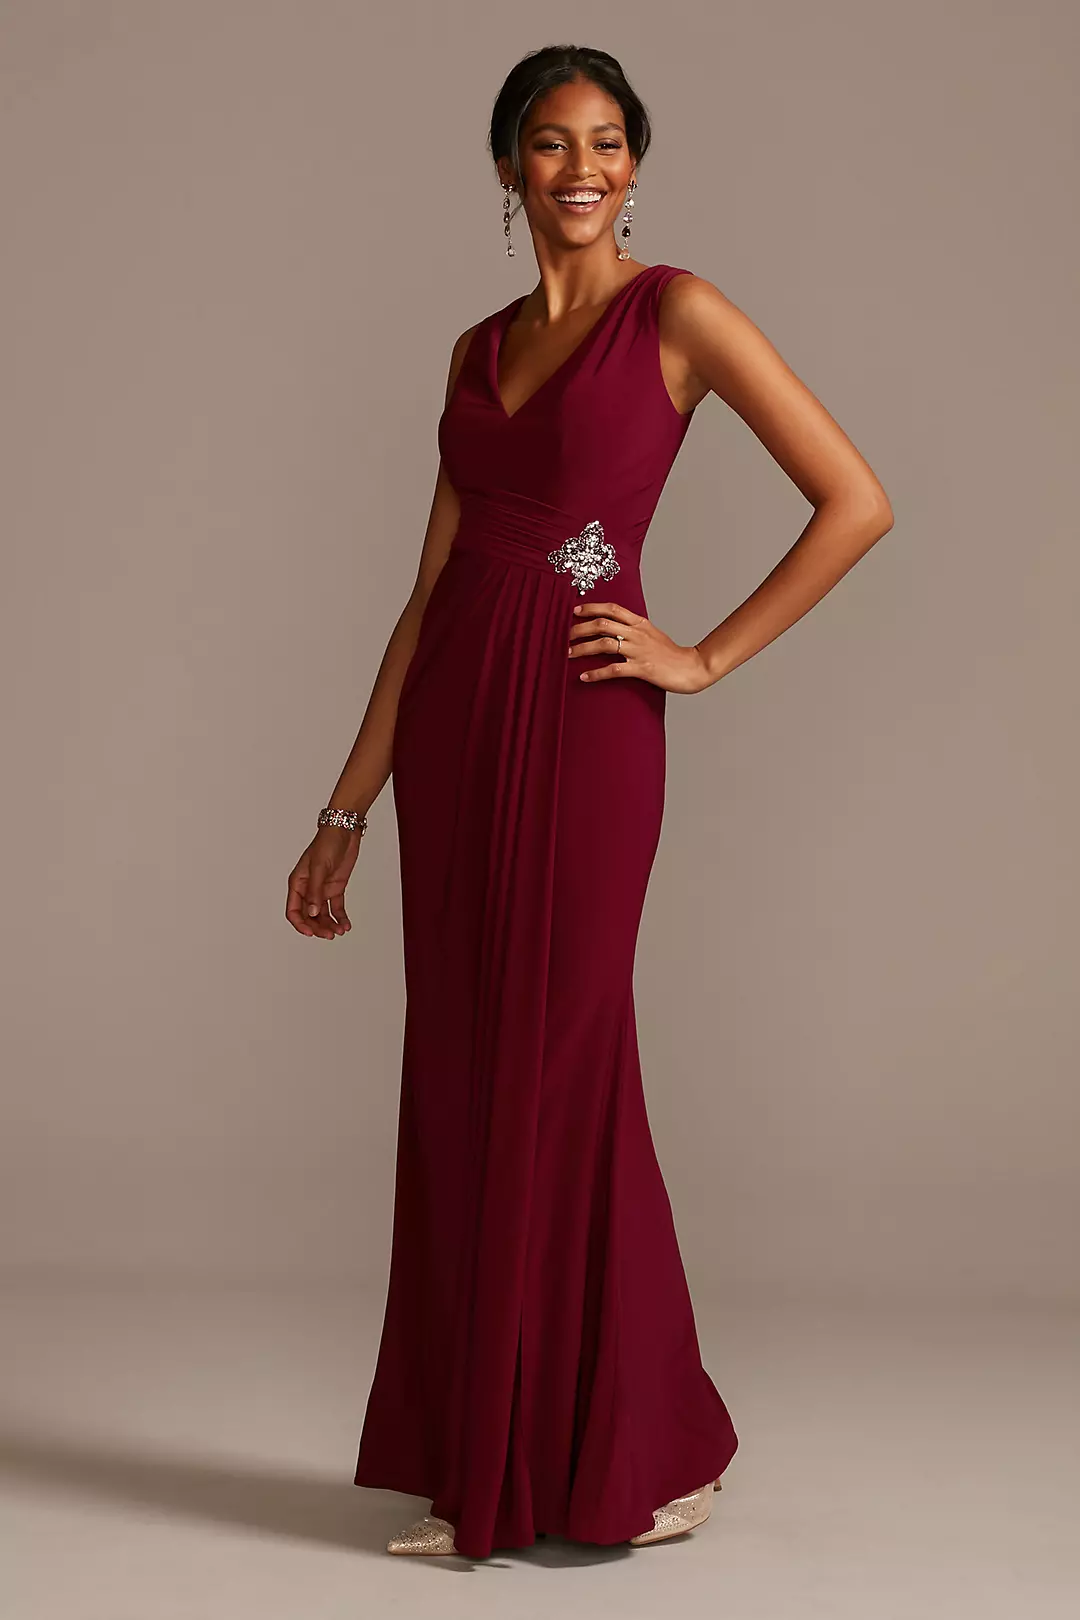 Draped V-Neck Jersey Dress with Crystal Applique Image